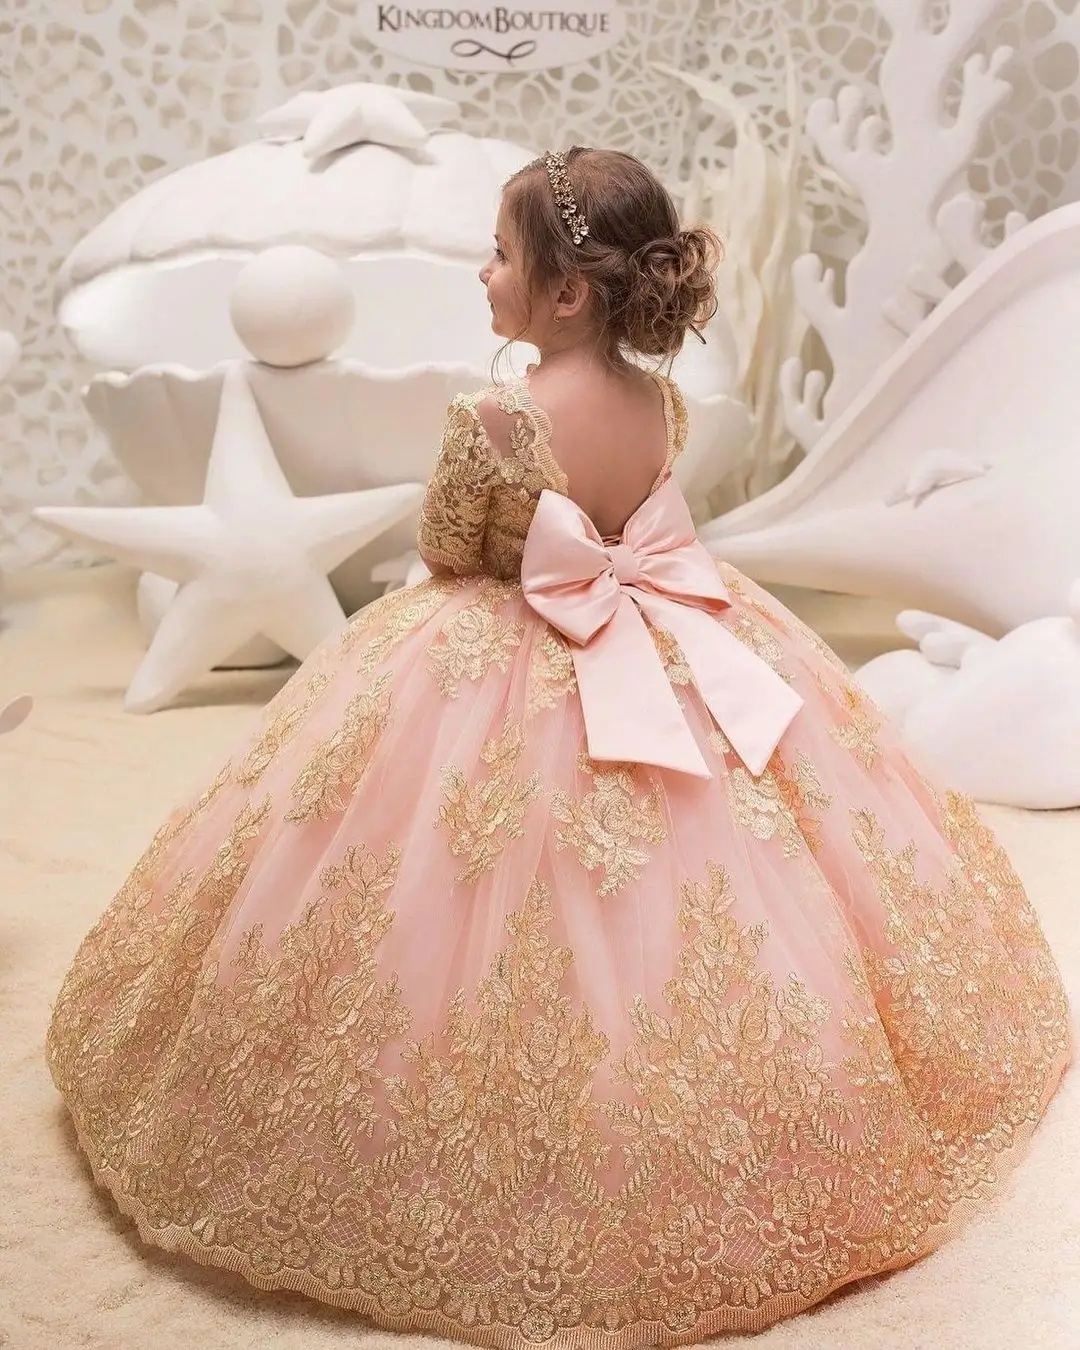 Elbow Sleeves Gold Lace Tulle Wedding Flower Girl Dress Kids Party Dress